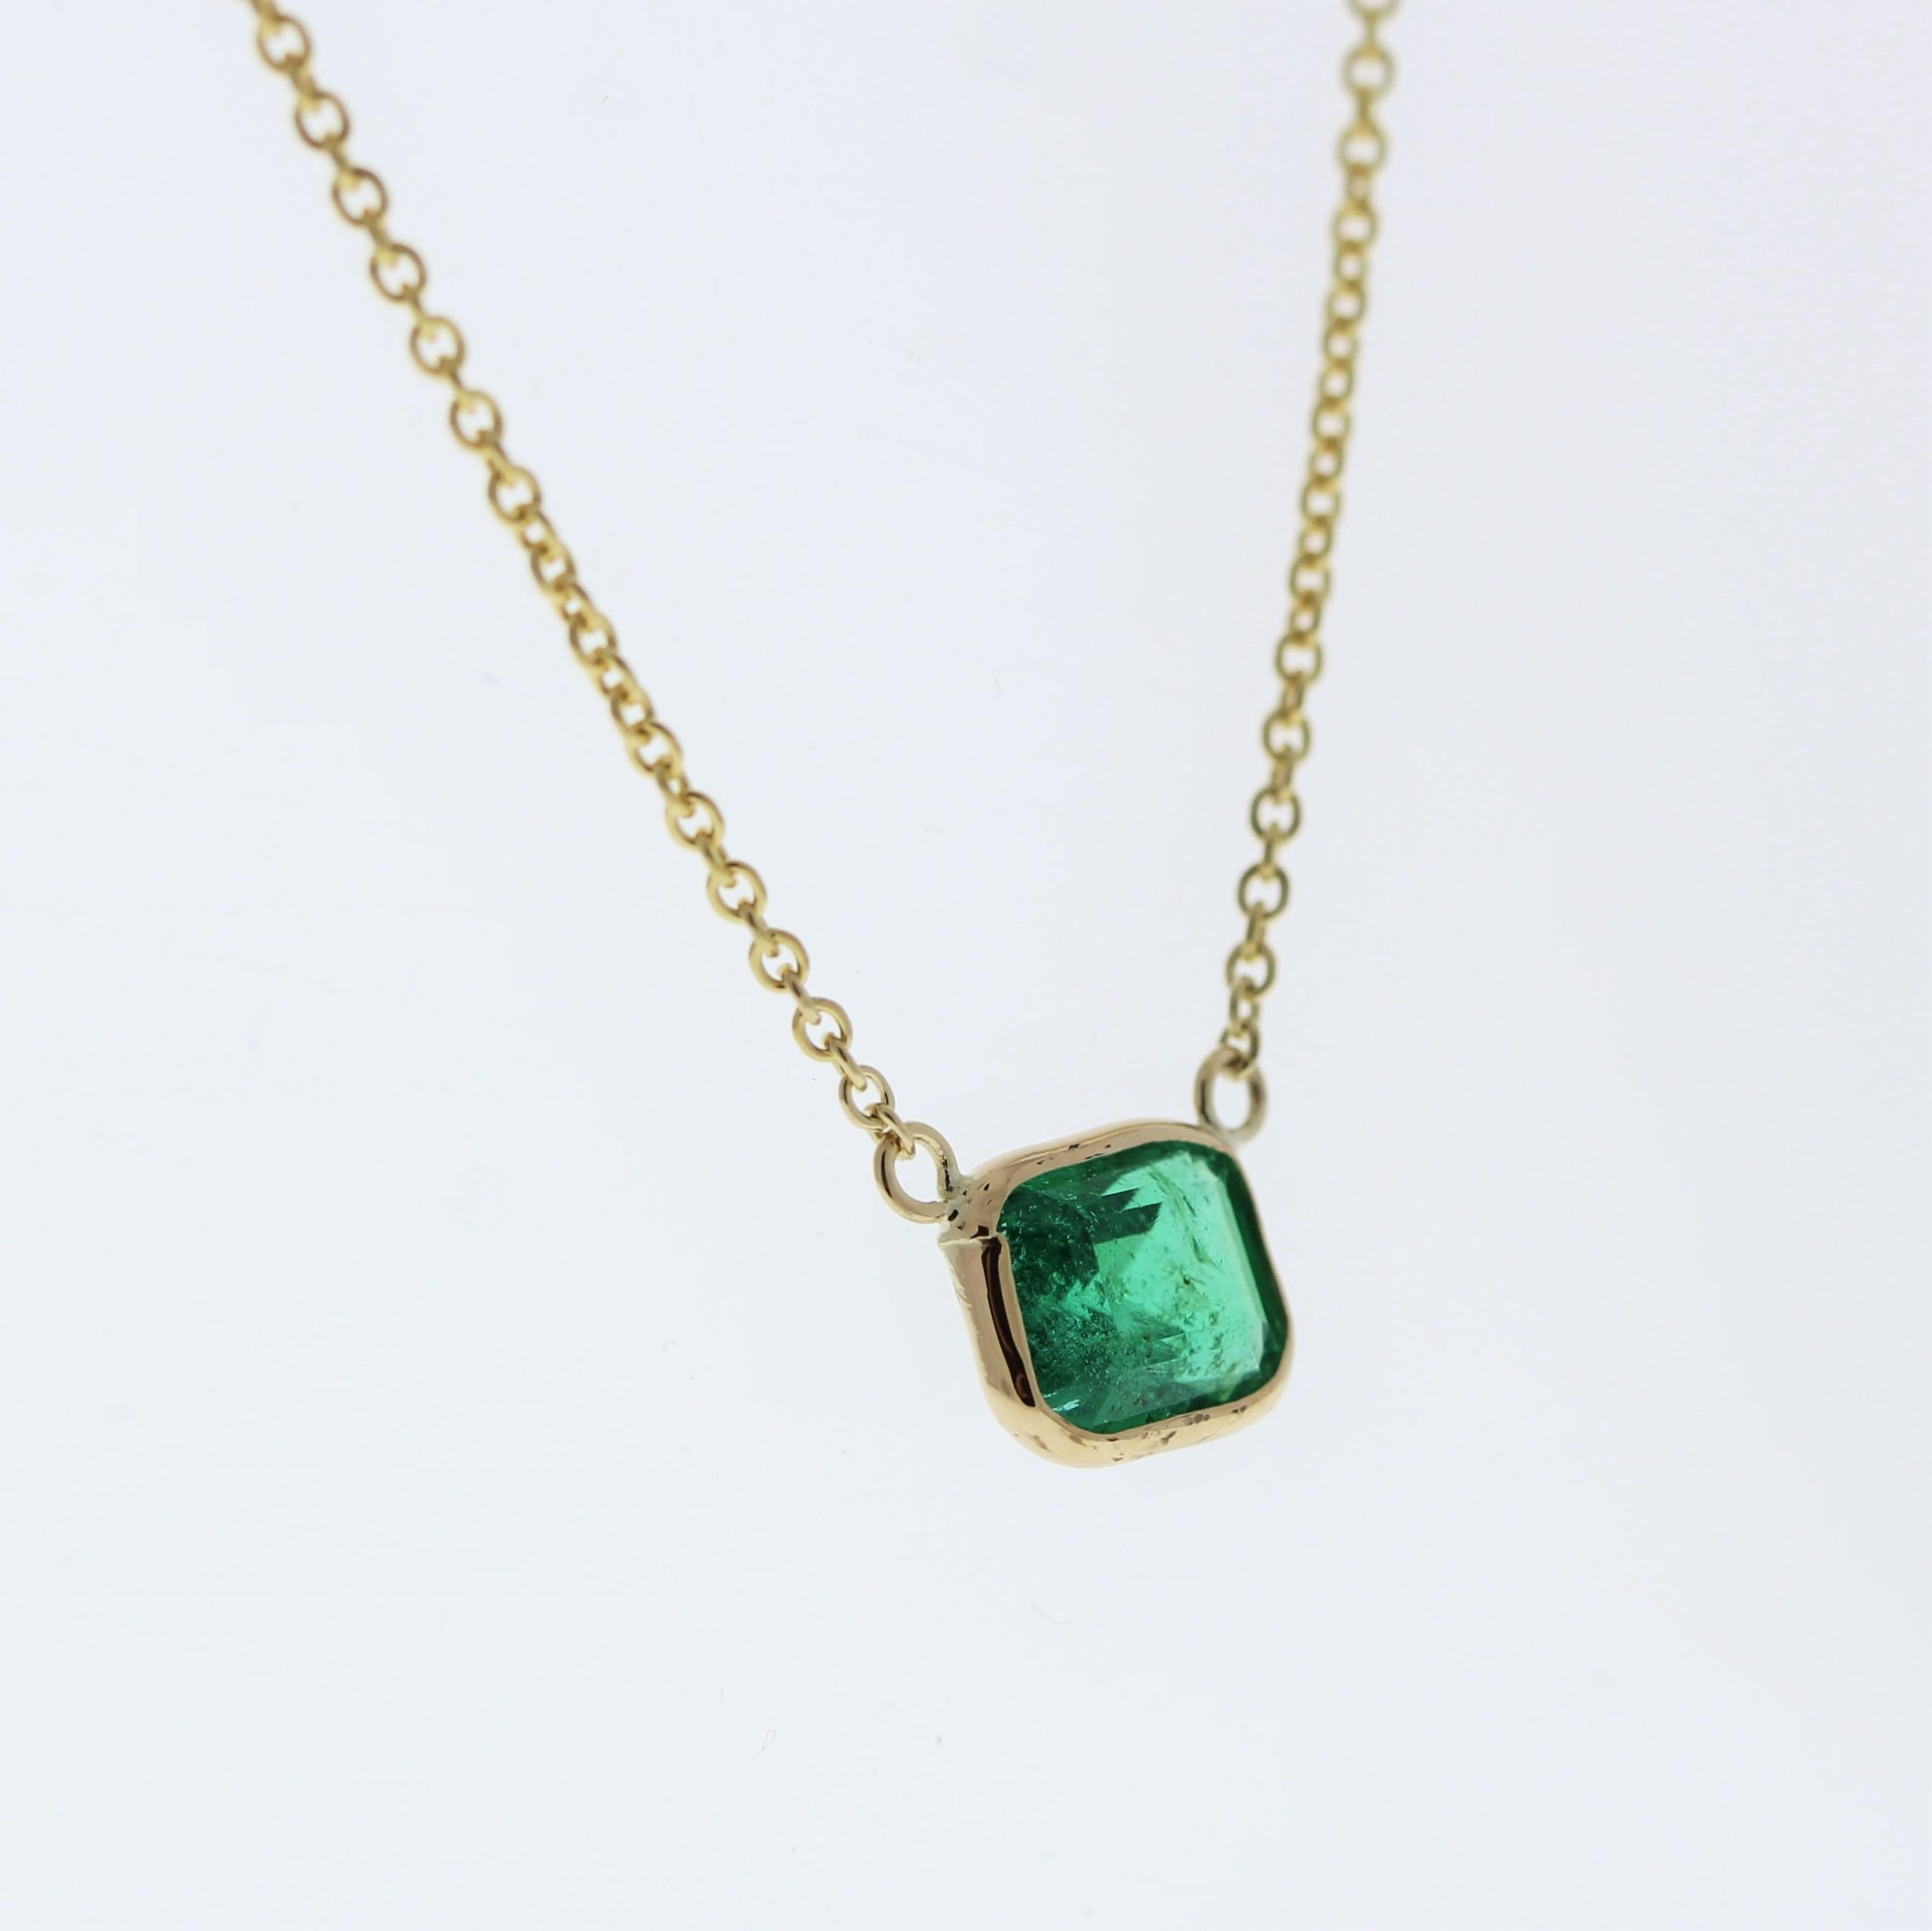 The necklace features a 1.15-carat emerald-cut emerald set in a 14 karat yellow gold pendant or setting. The emerald cut and the lush green color of the emerald against the yellow gold setting are likely to create an elegant and eye-catching fashion